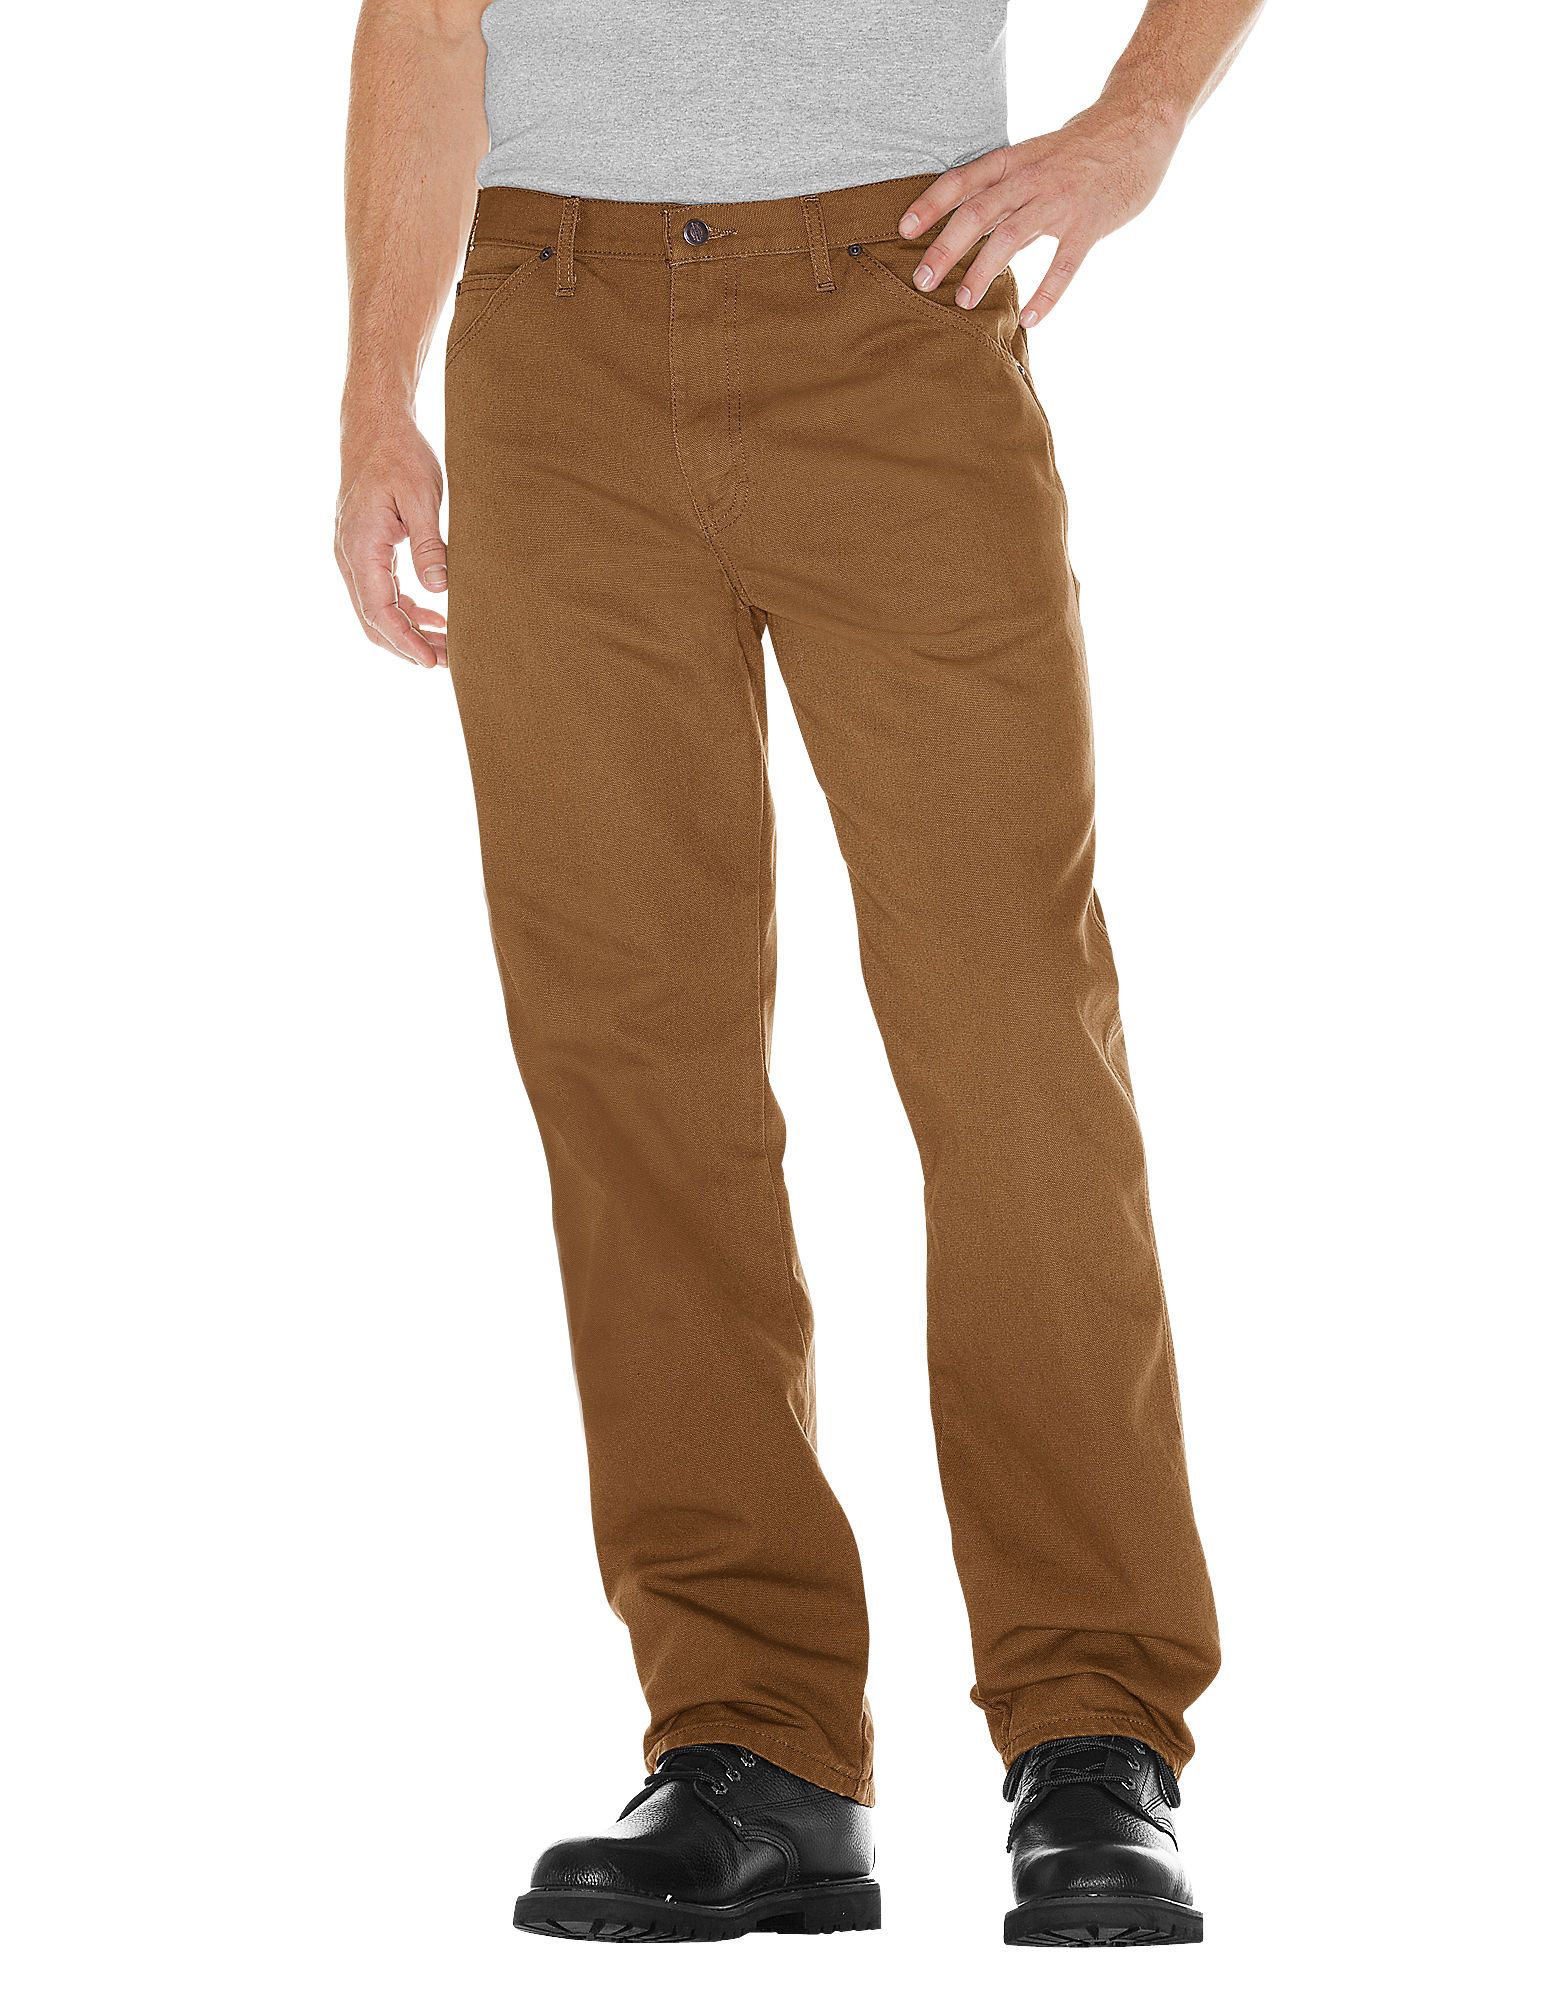 Dickies Men's Relaxed Fit Carpenter Jeans - 1939